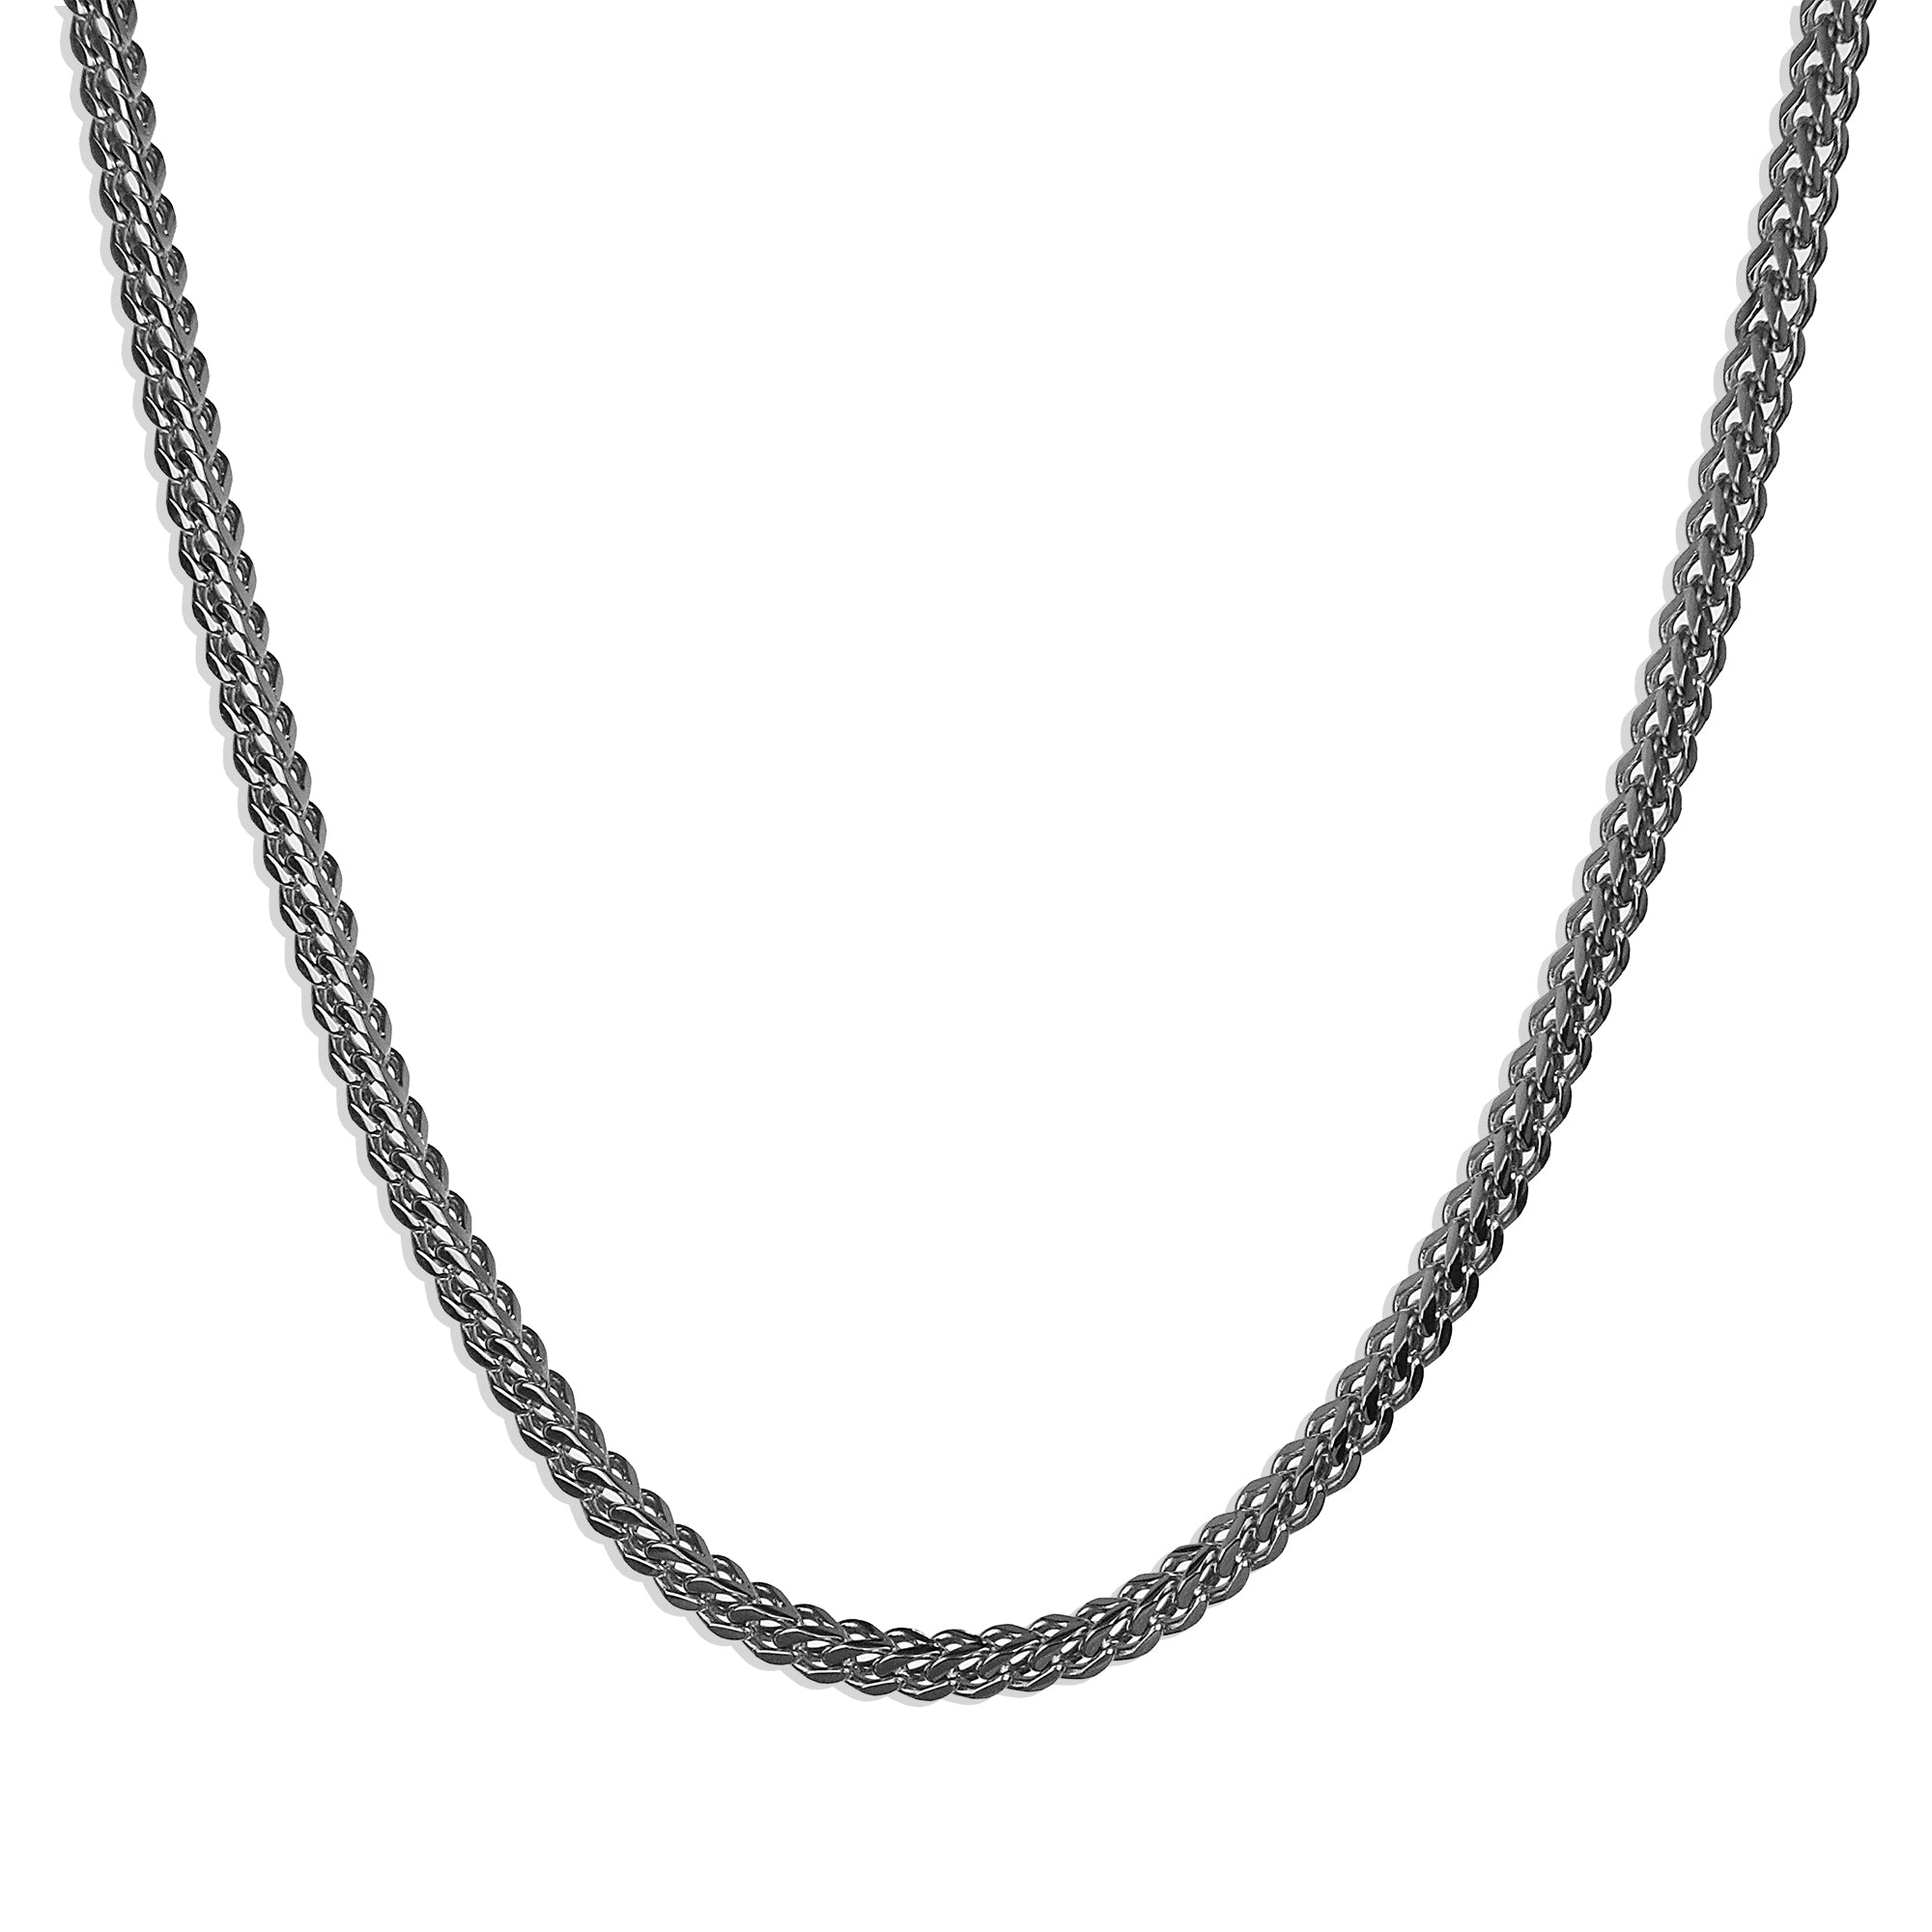 Franco Chain Necklace - Silver 2.5mm